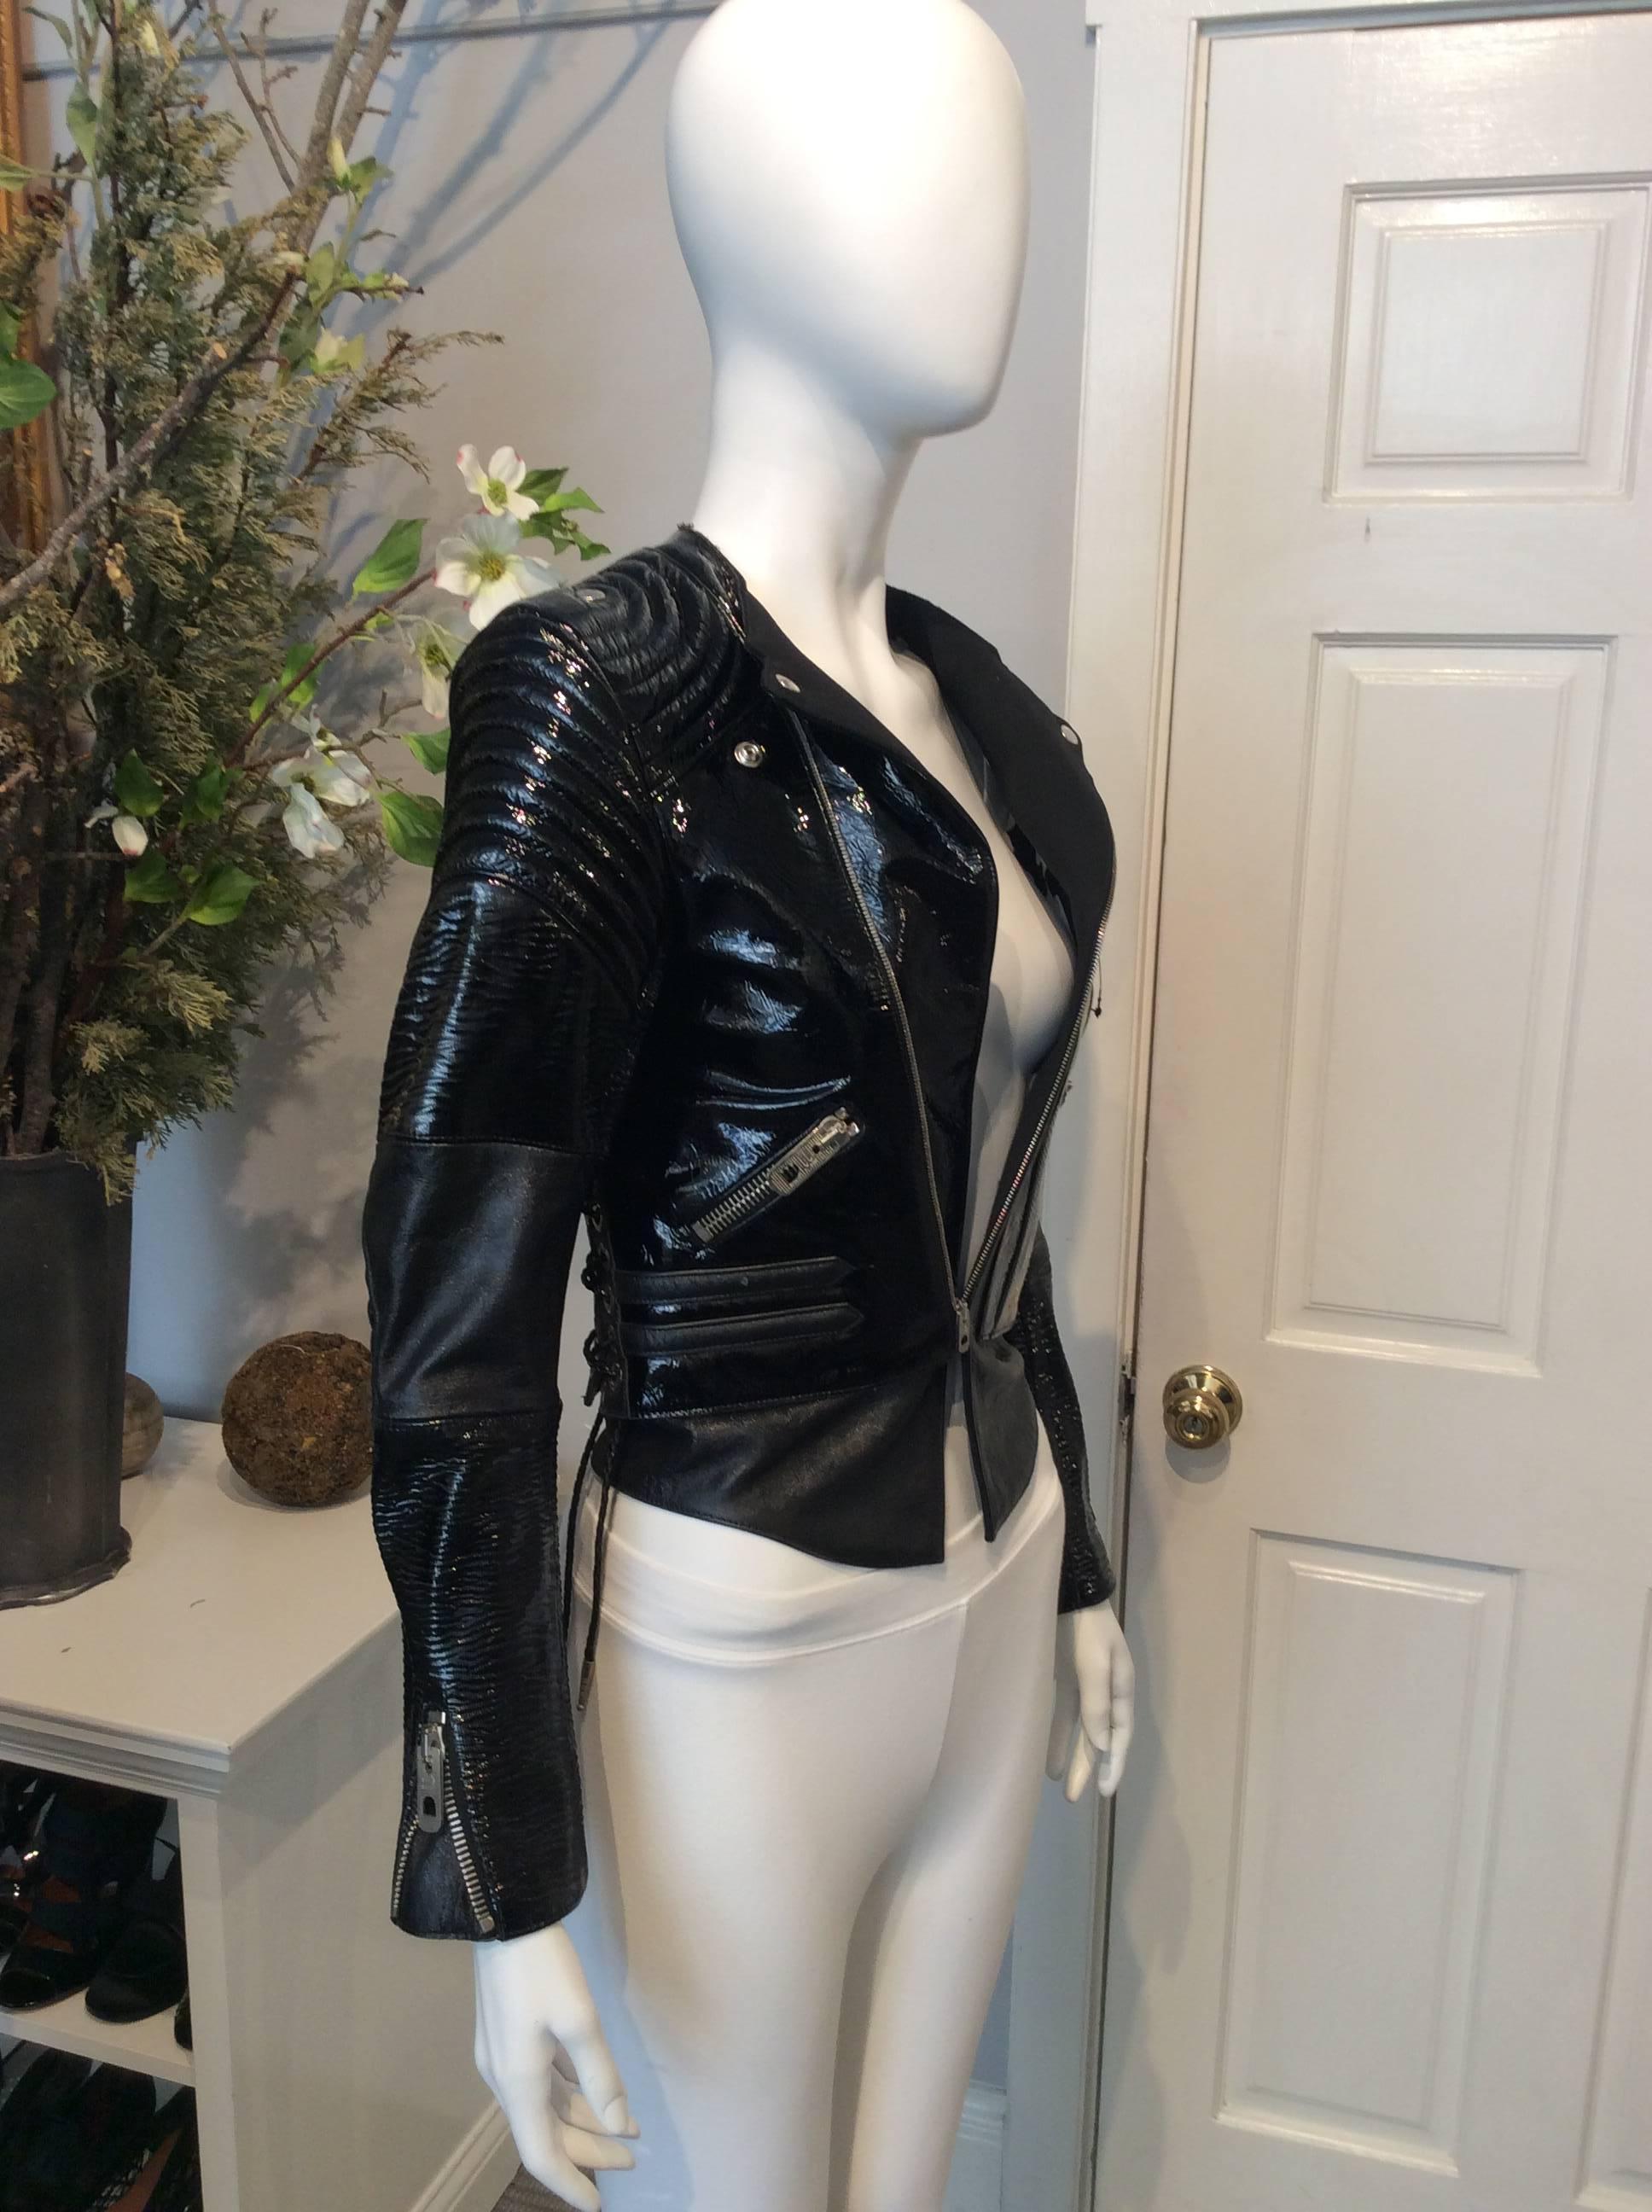 Balenciaga Black Patent Leather Textured Zippered Motorcycle Jacket  In New Condition For Sale In San Francisco, CA